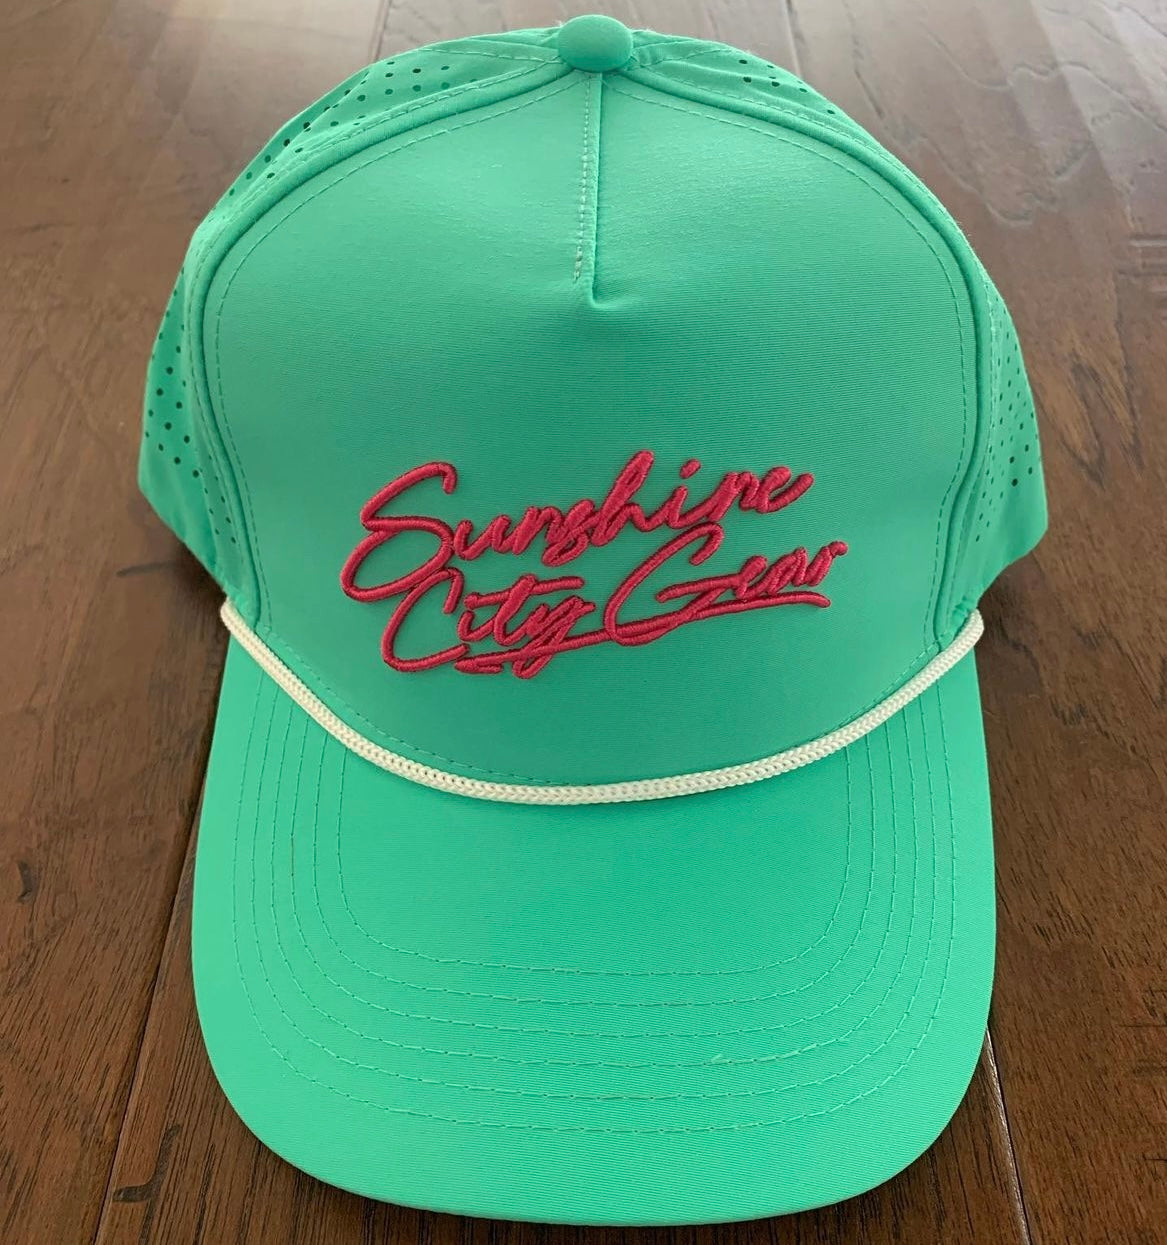 The Vice Hat